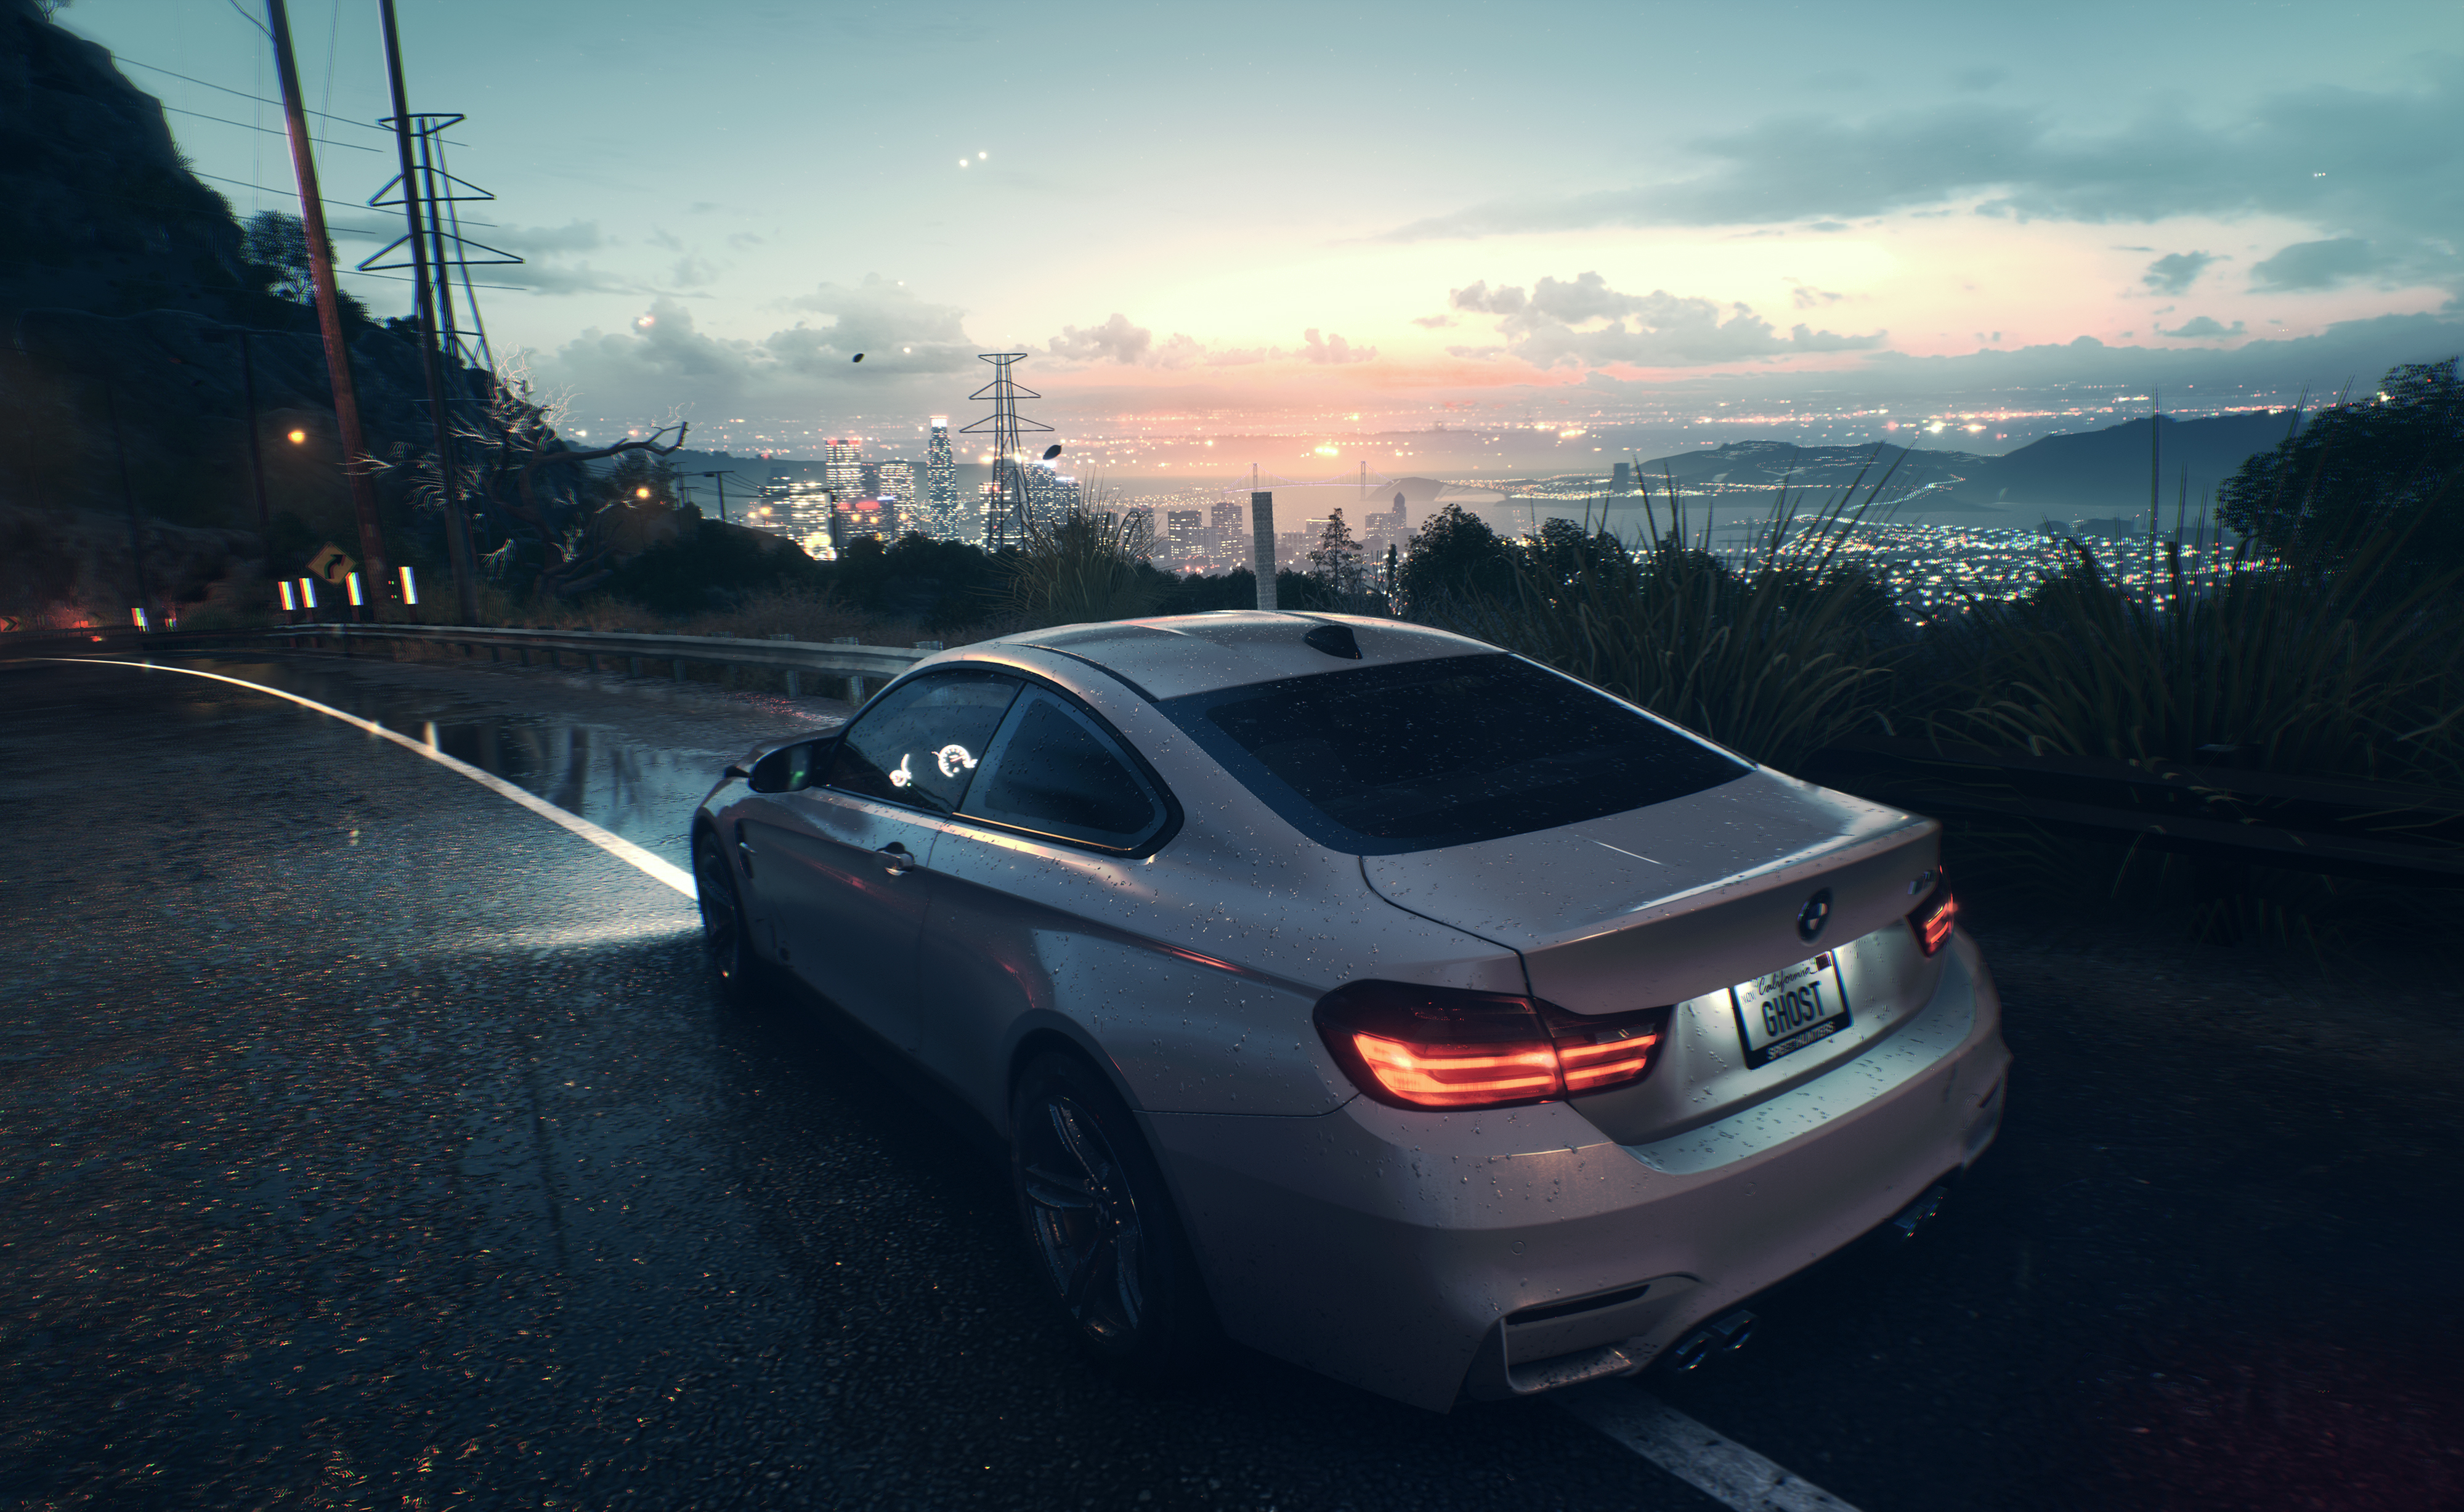 Need For Speed (2015) Backgrounds, Compatible - PC, Mobile, Gadgets| 4000x2454 px